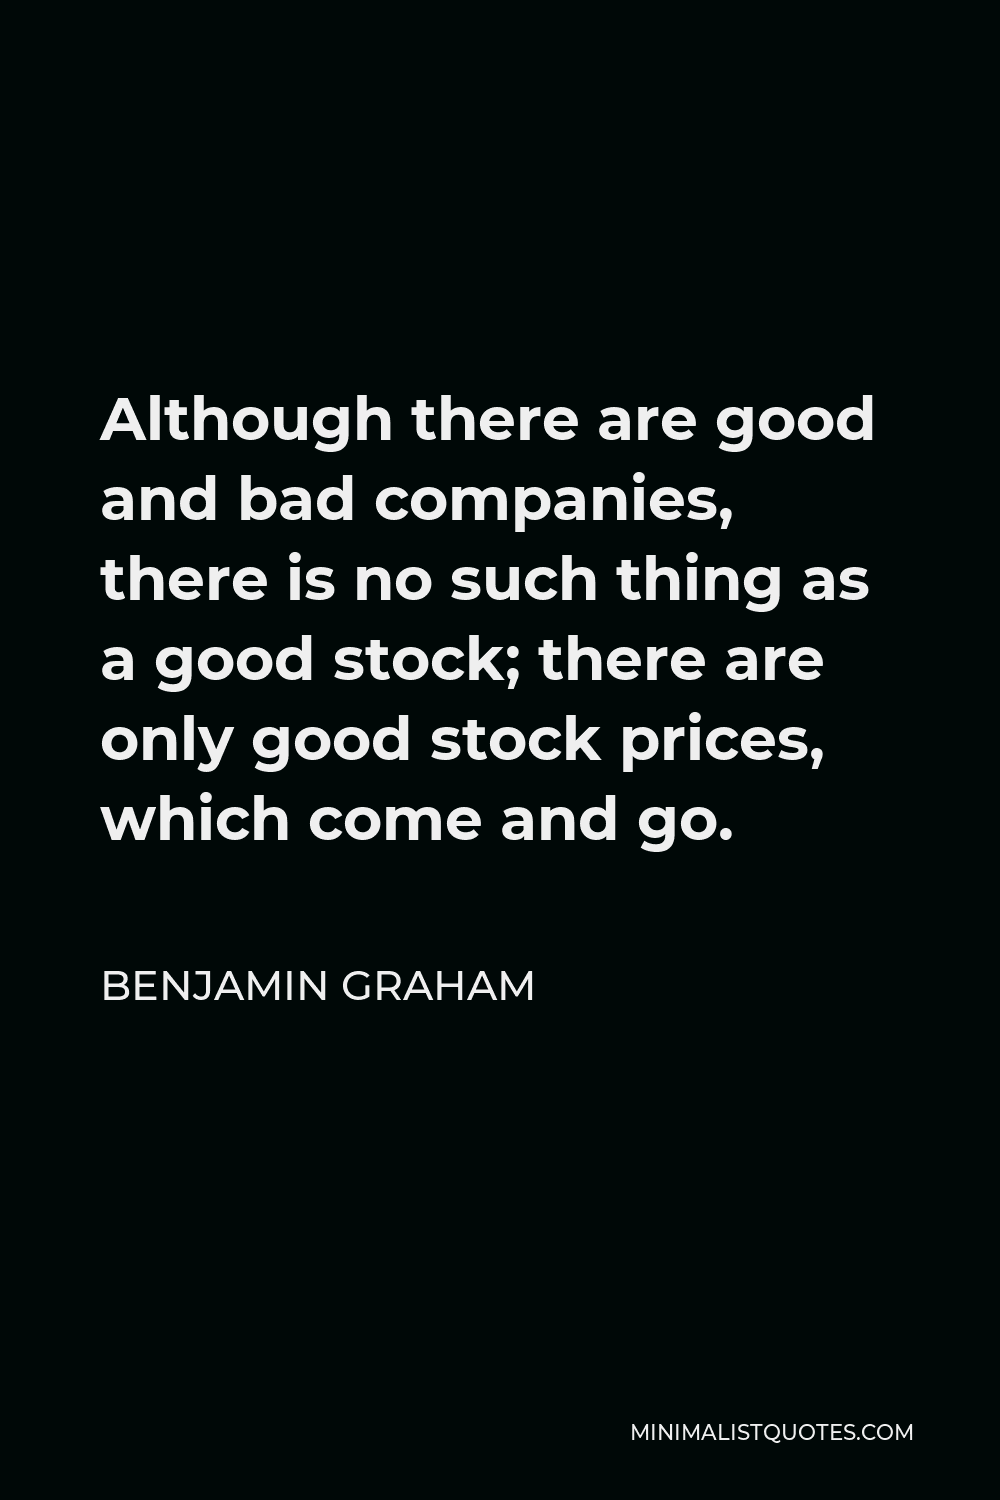 Benjamin Graham Quote - Although there are good and bad companies, there is no such thing as a good stock; there are only good stock prices, which come and go.